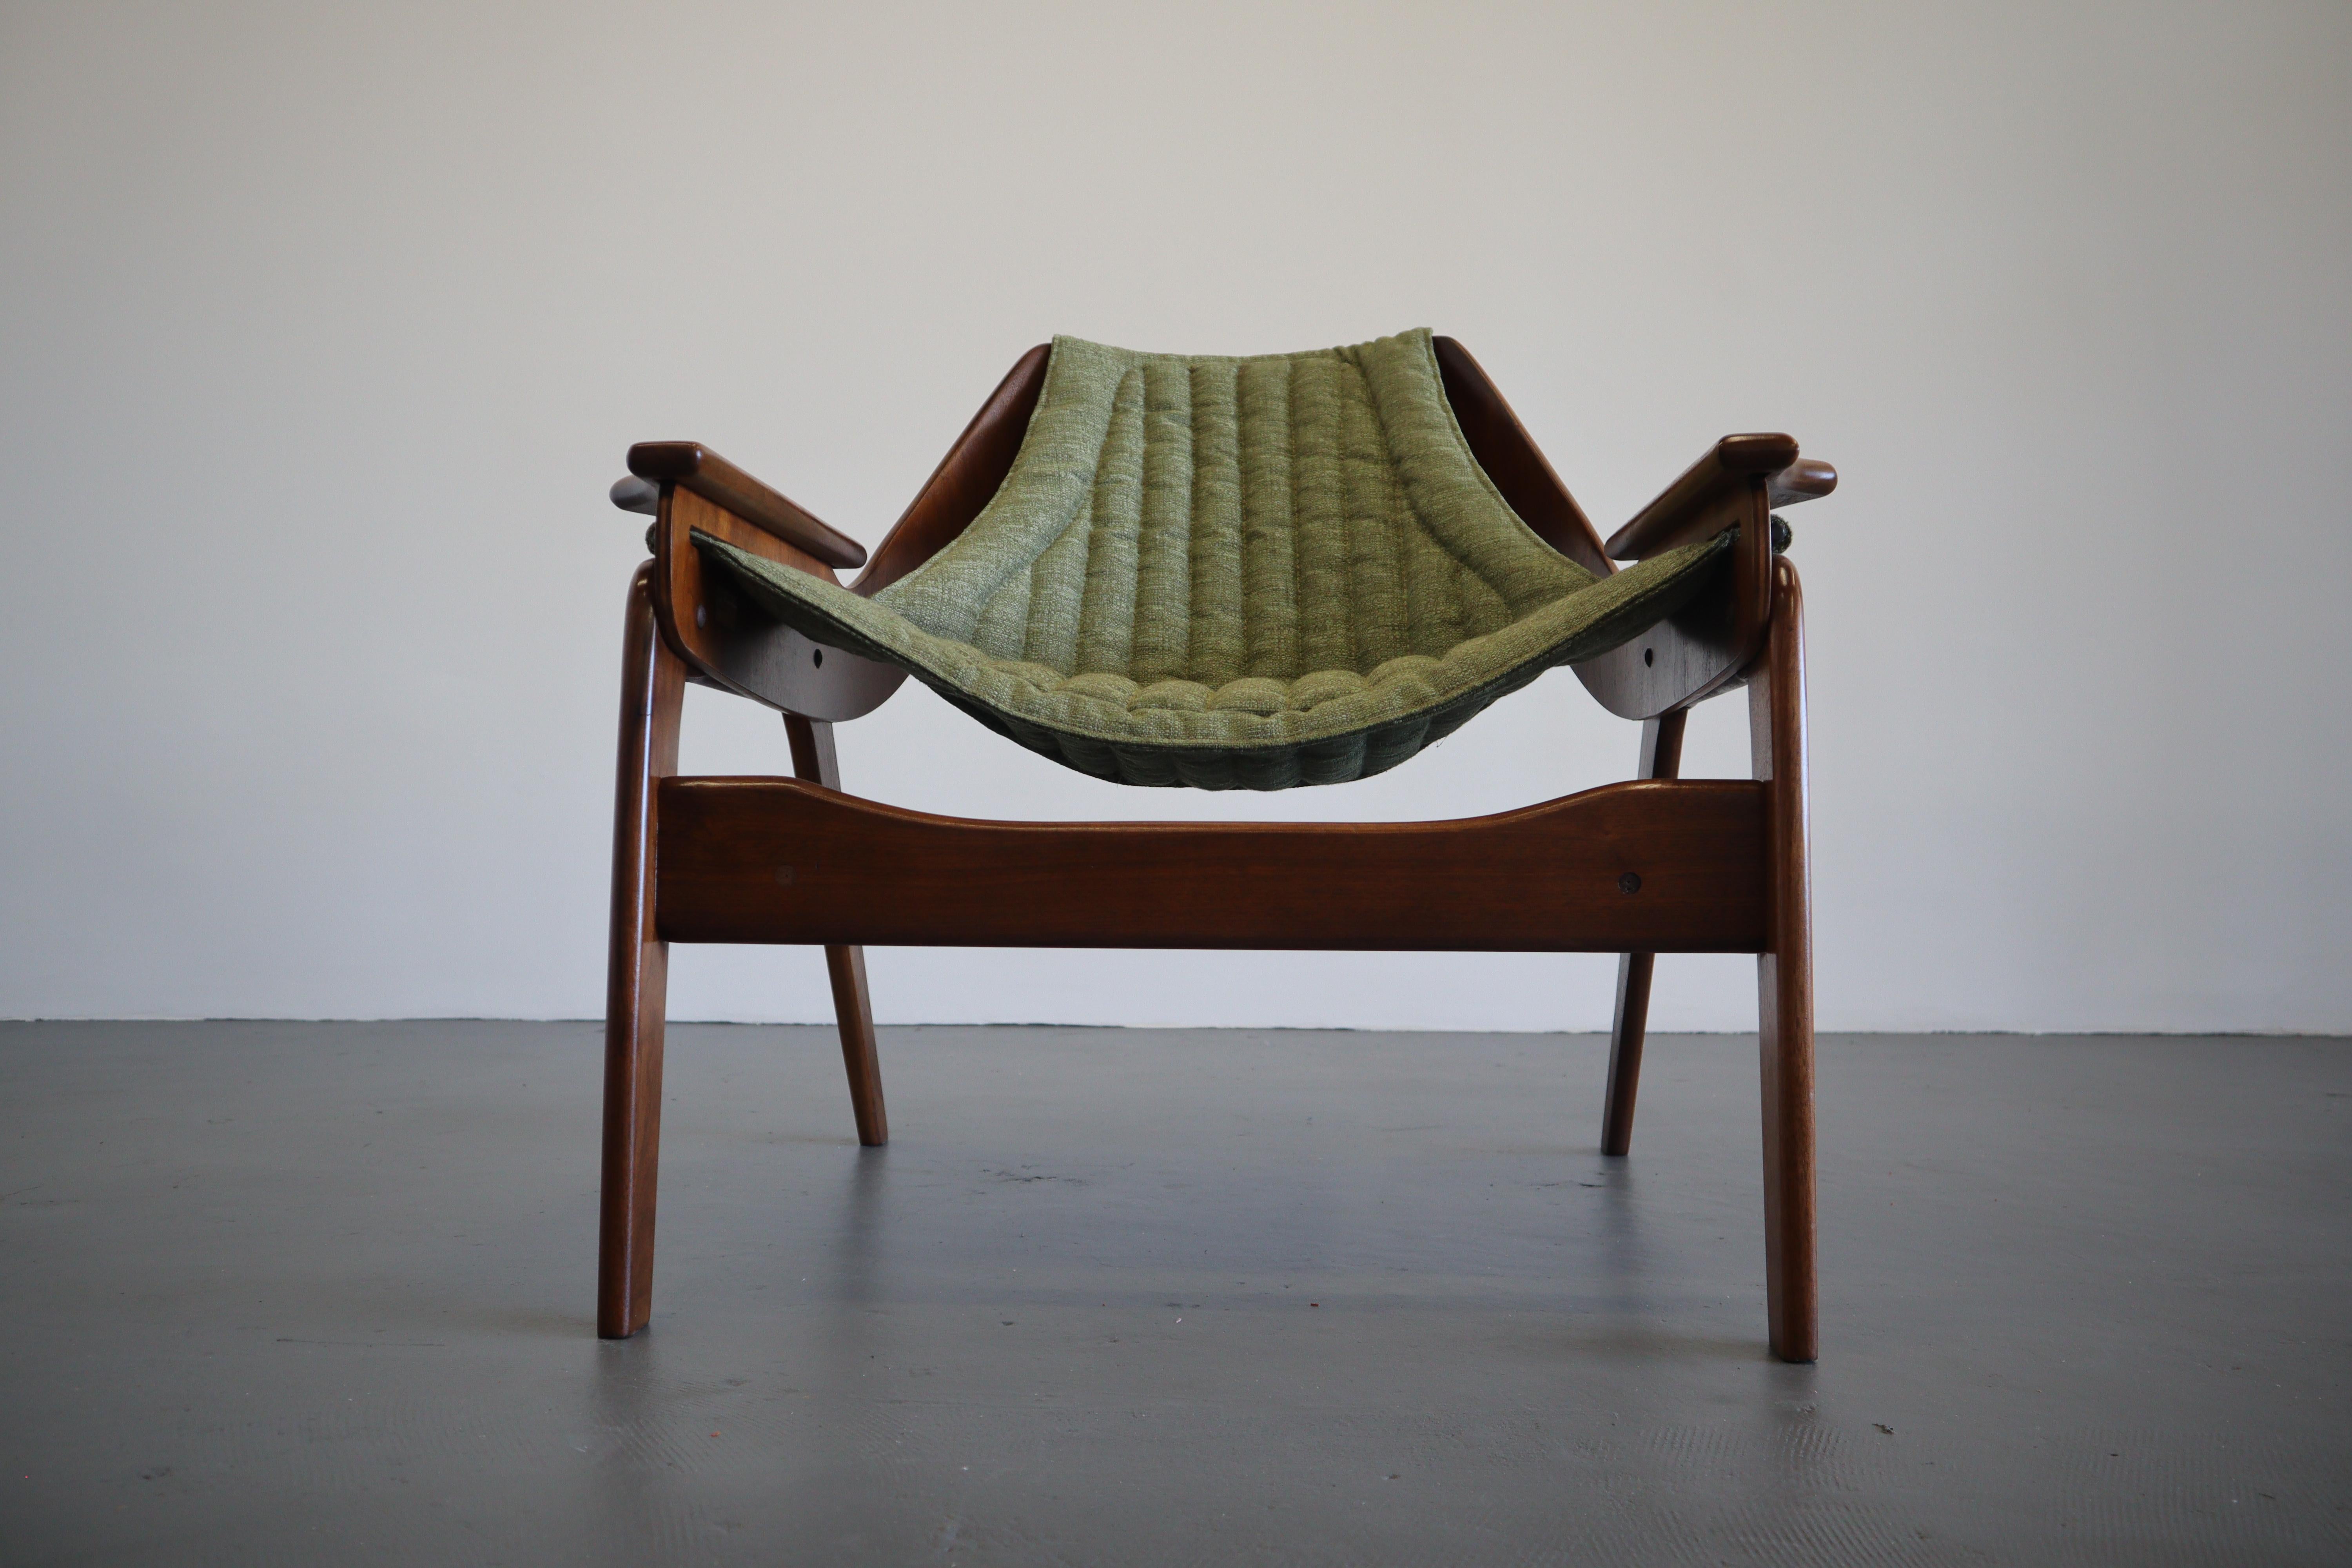 A sturdy walnut frame with a sculptural concave back rest, this mid-century marvel is designed by Jerry Johnson. The olive channeled tweed sling design is well suited for lounging and relaxation. Substantial base with angled legs and oversized plugs